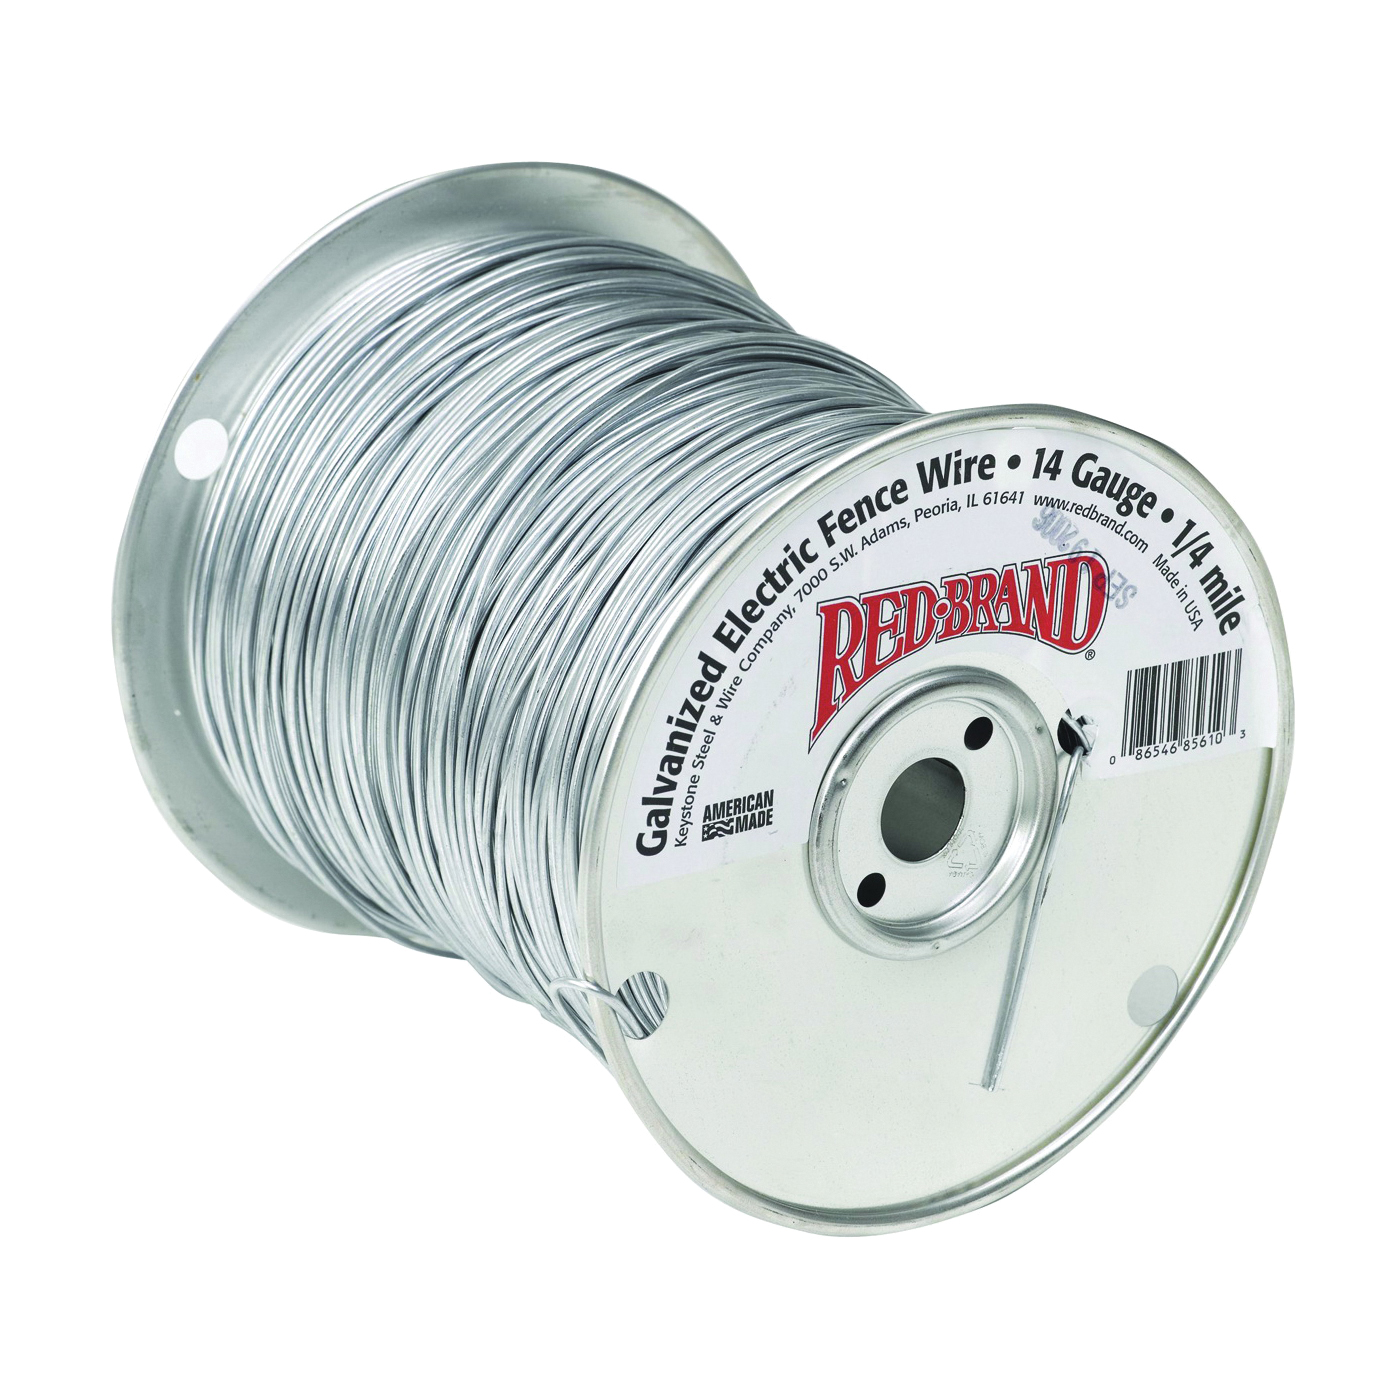 85610 Electric Fence Wire, 14 ga Wire, Steel Conductor, 1/4 mile L